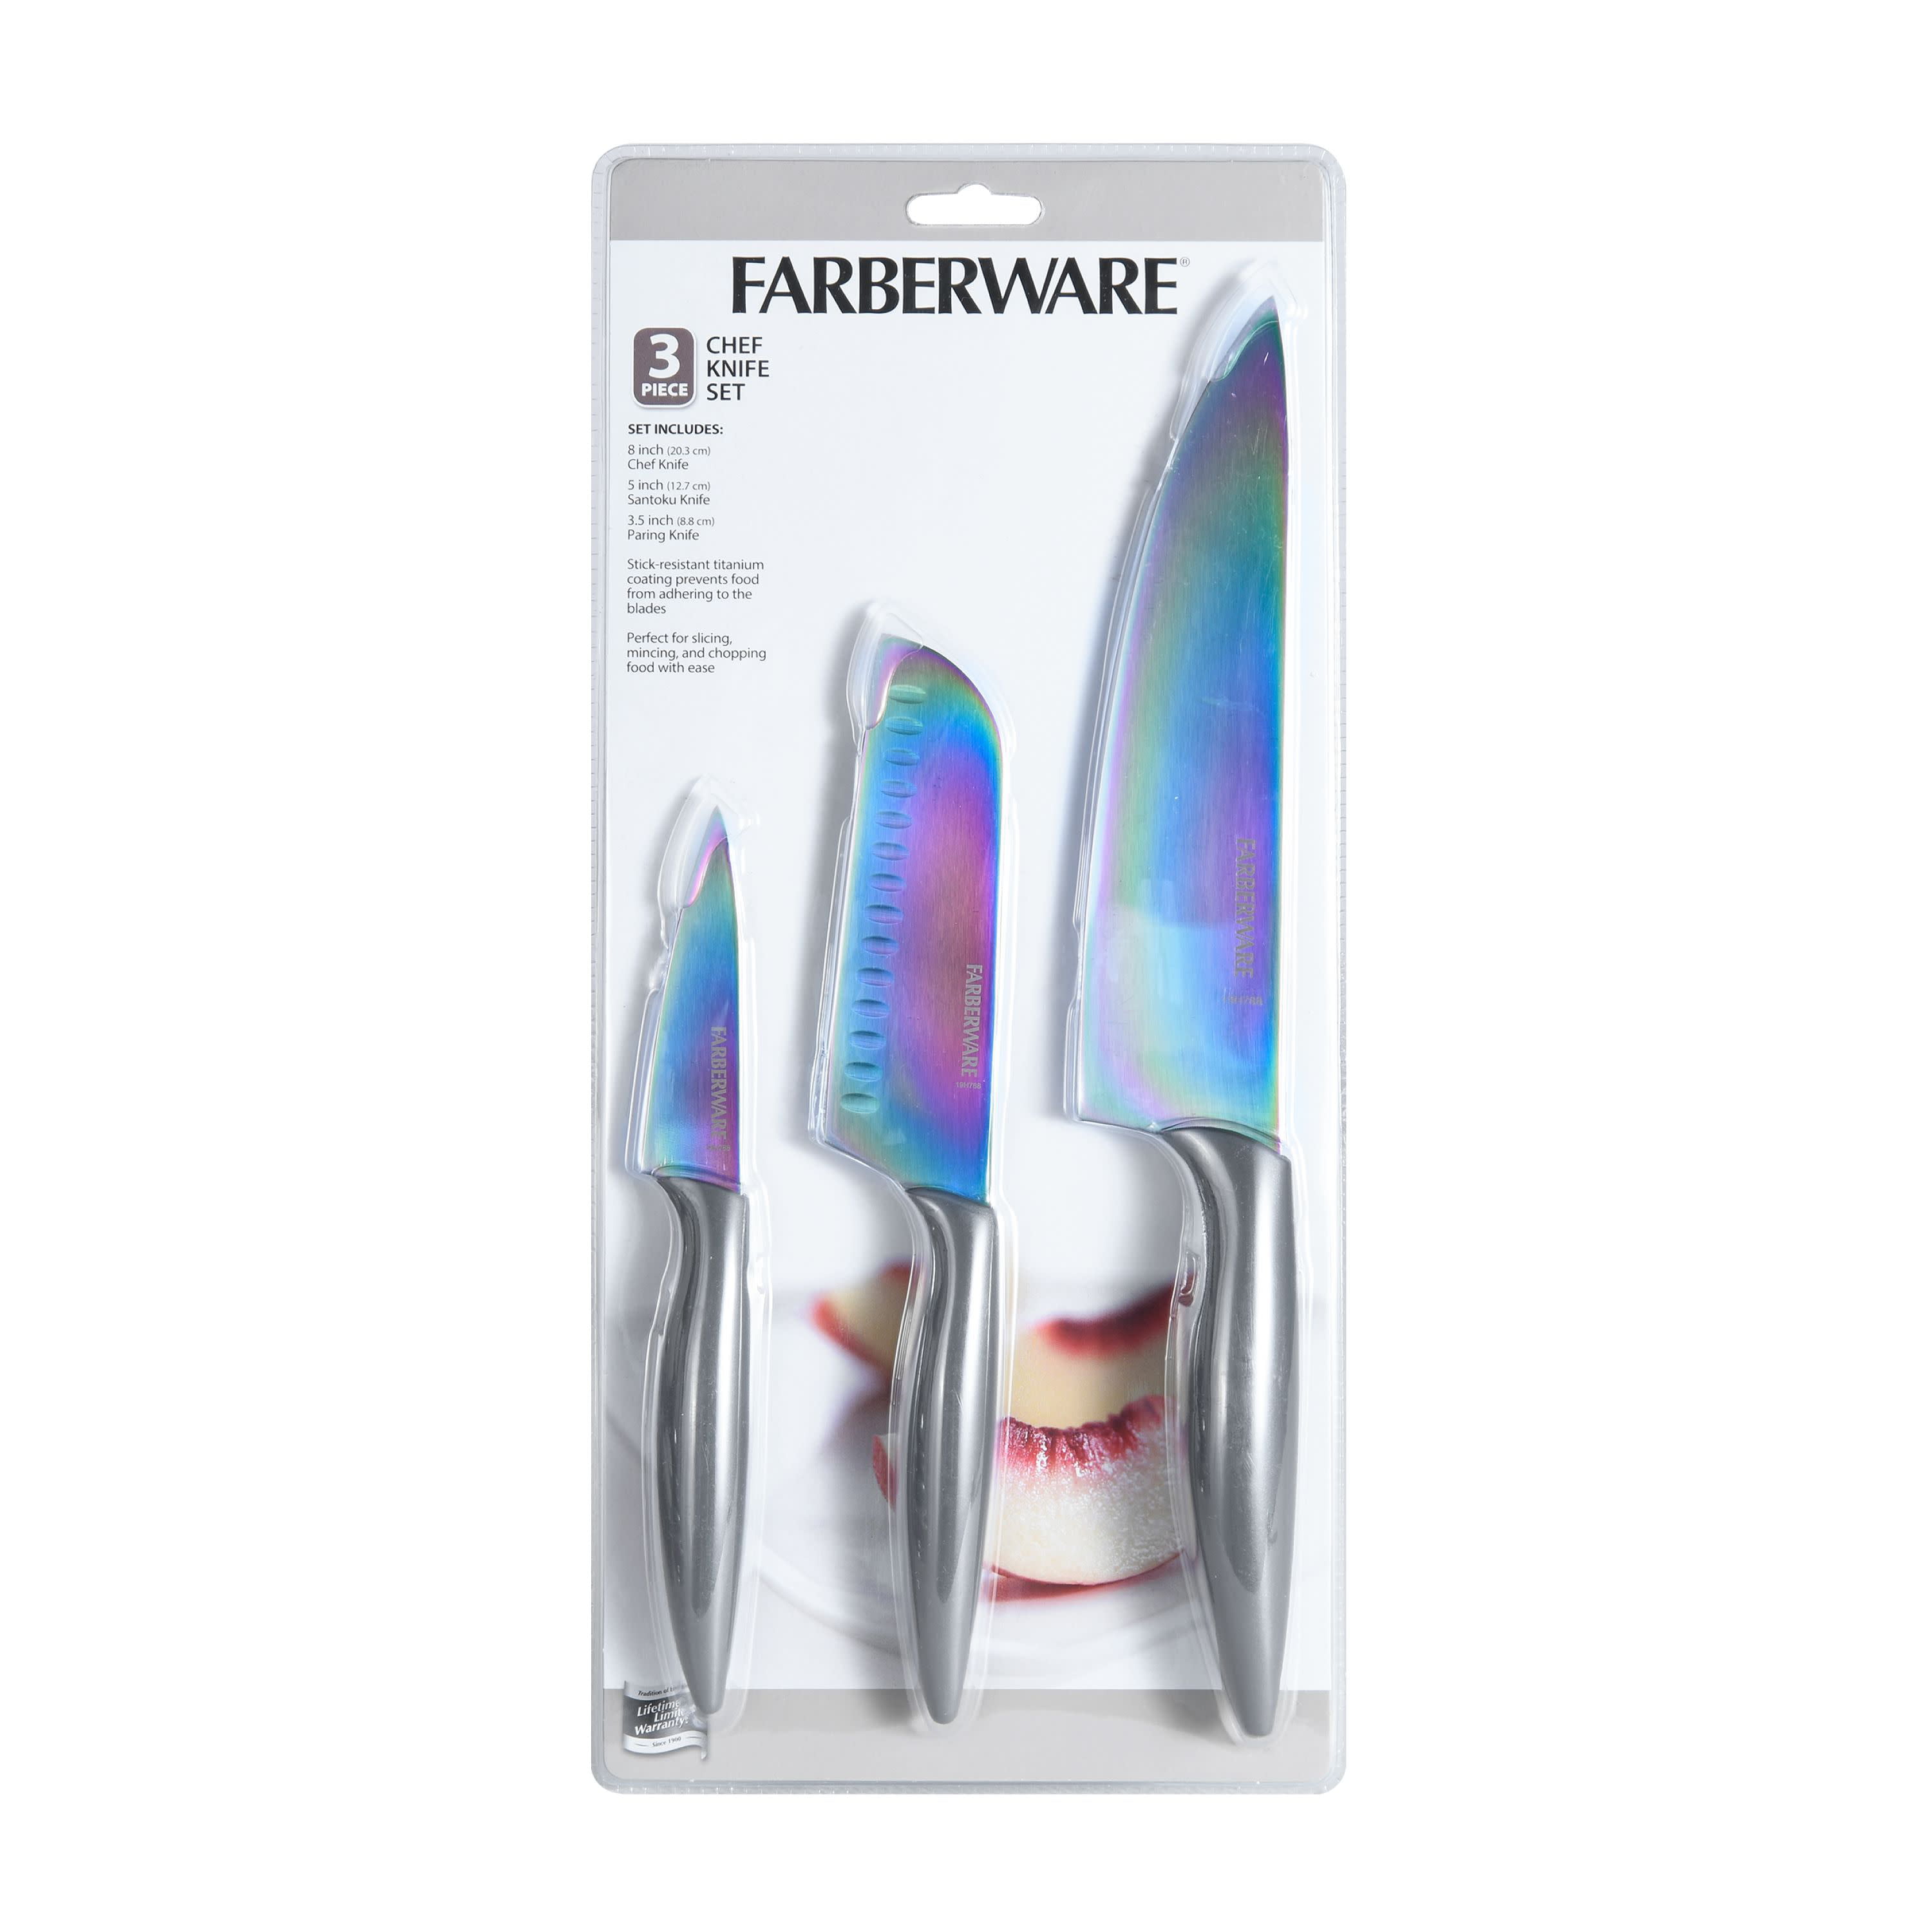  Hollory Rainbow Kitchen Knife Set 3 Piece, Razor Sharp German  Stainless Steel Blade with 8 in Chef, 5 in Utility, 3.5 in Paring – Starter  Set with Gift Box: Home & Kitchen